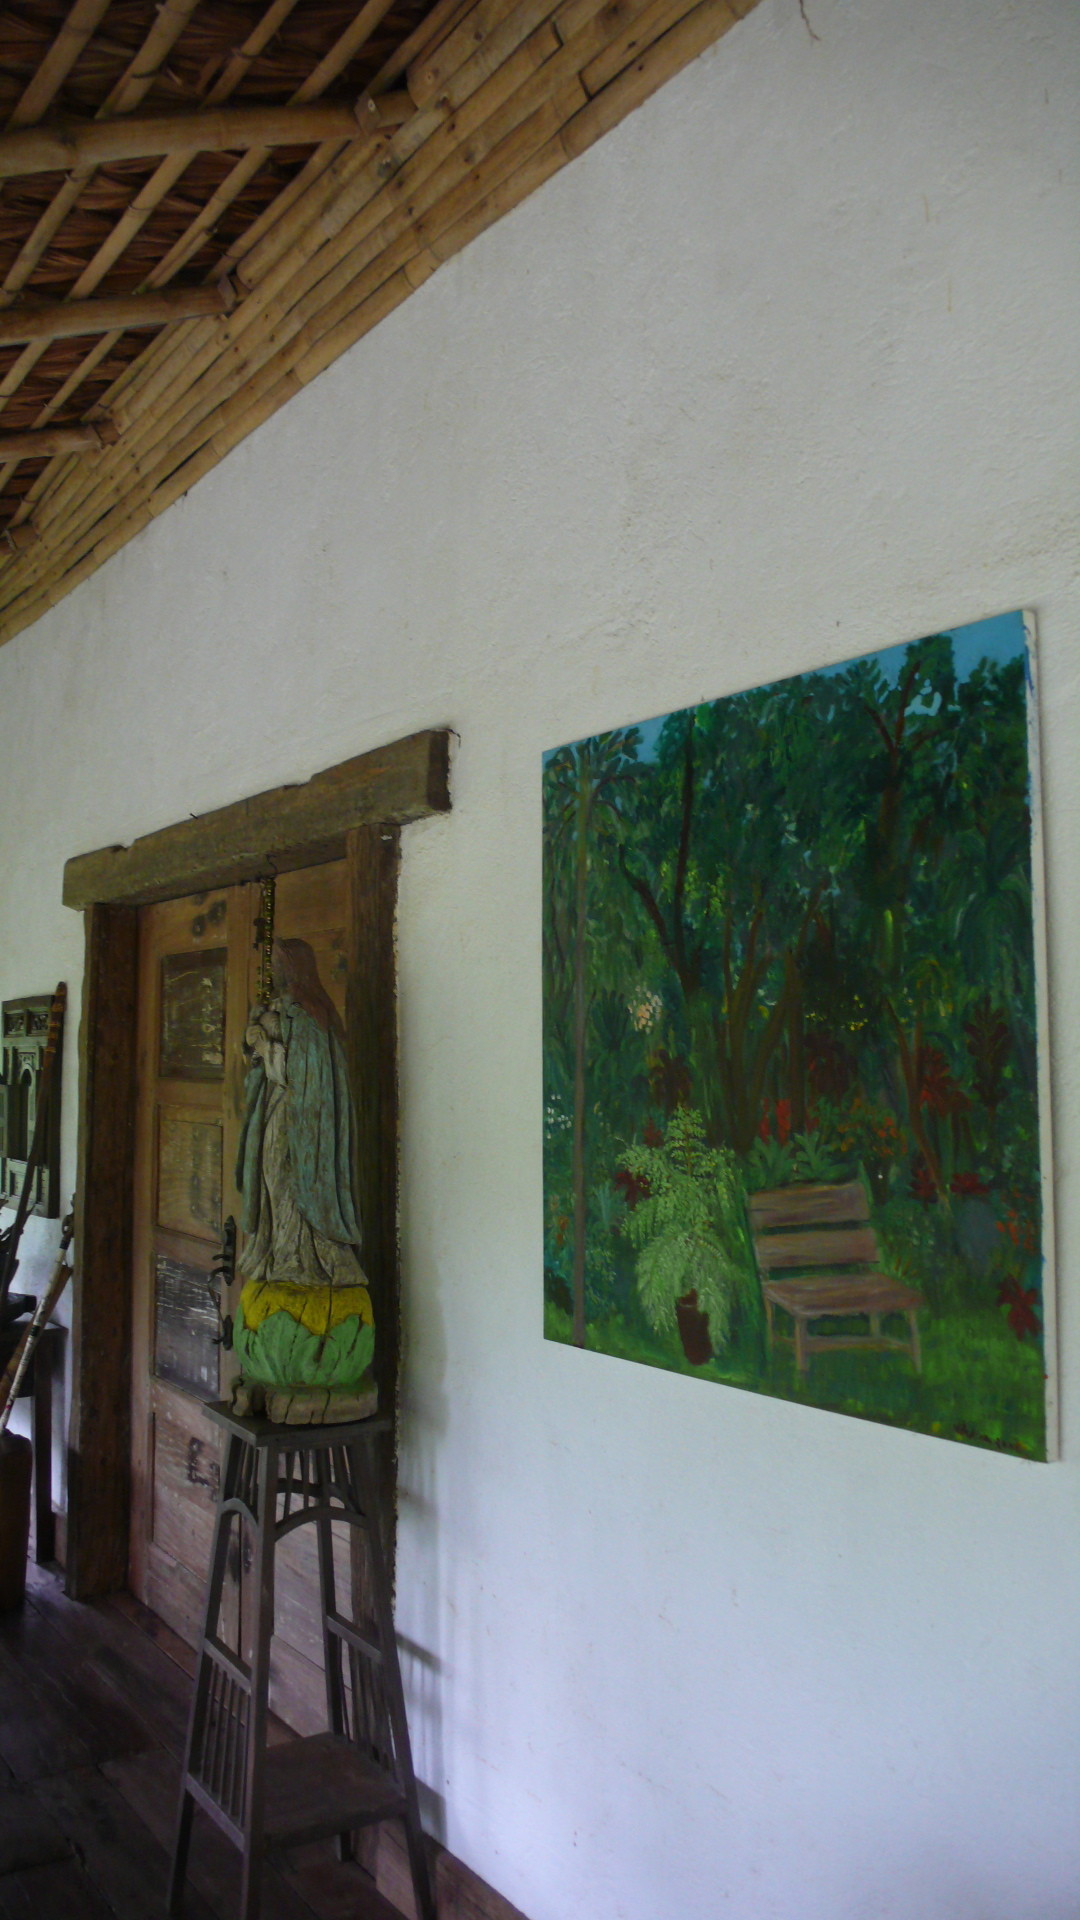 One of her paintings